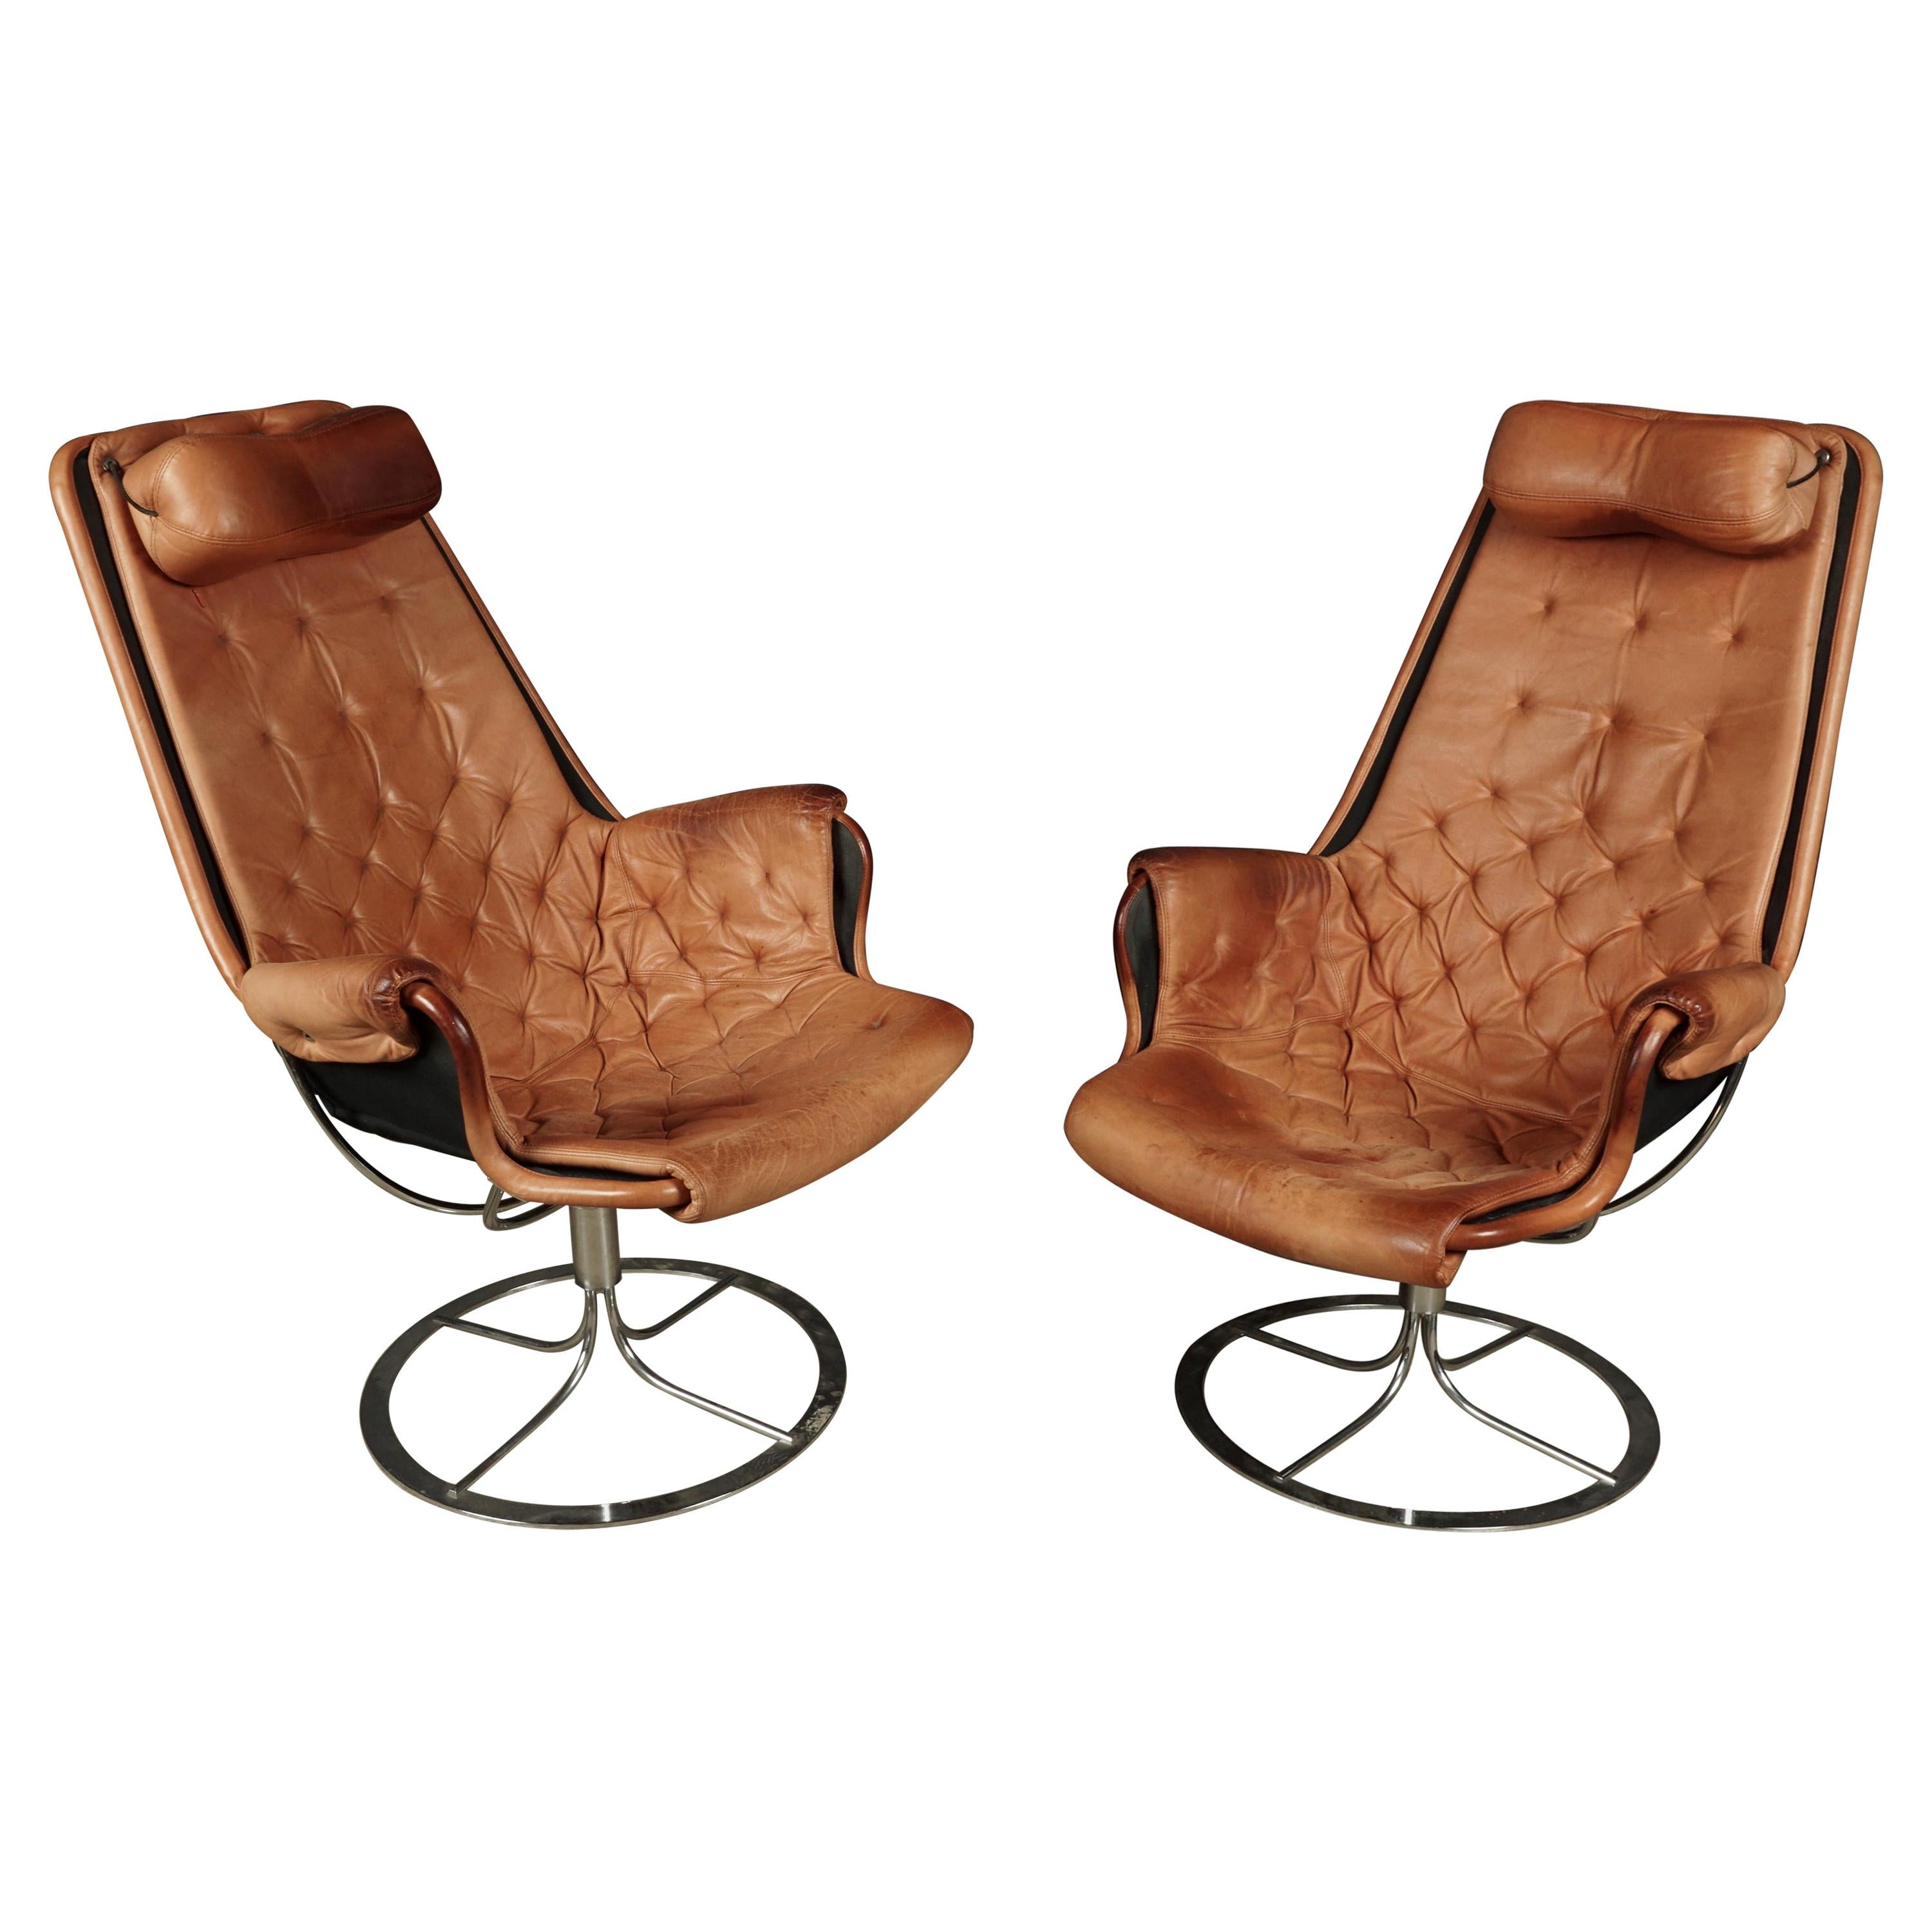 Vintage Pair of Bruno Mathsson Jetson Lounge Chairs, from Sweden, circa 1980